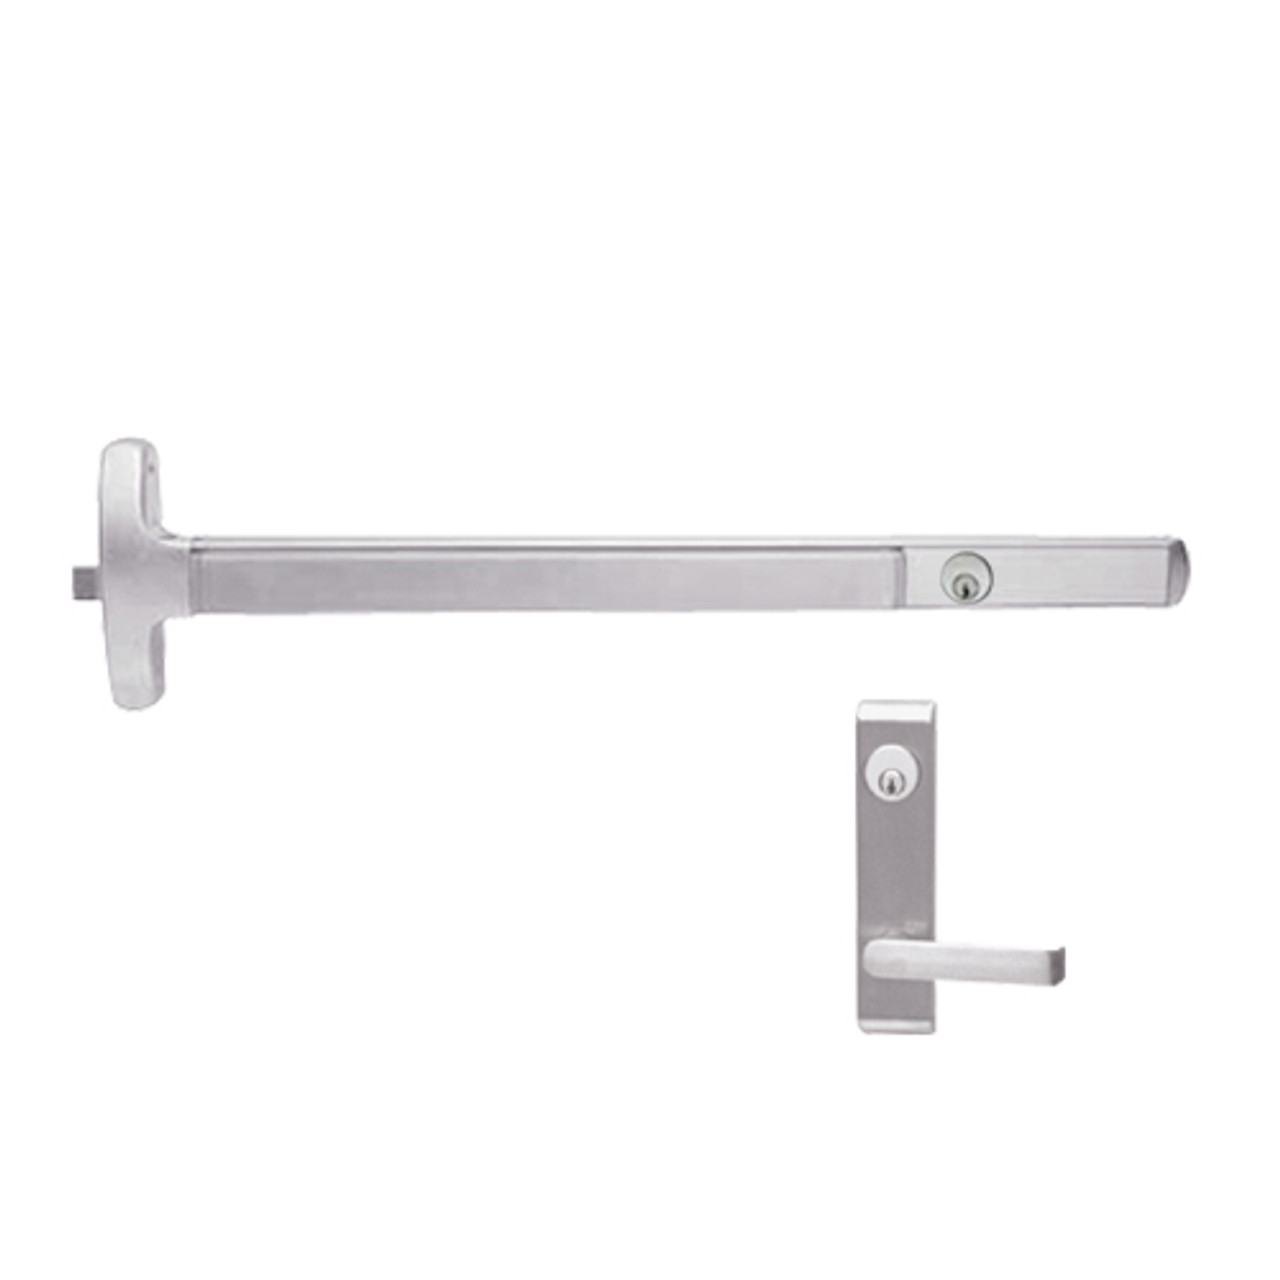 CD24-R-L-DANE-US32-4-LHR Falcon Exit Device in Polished Stainless Steel